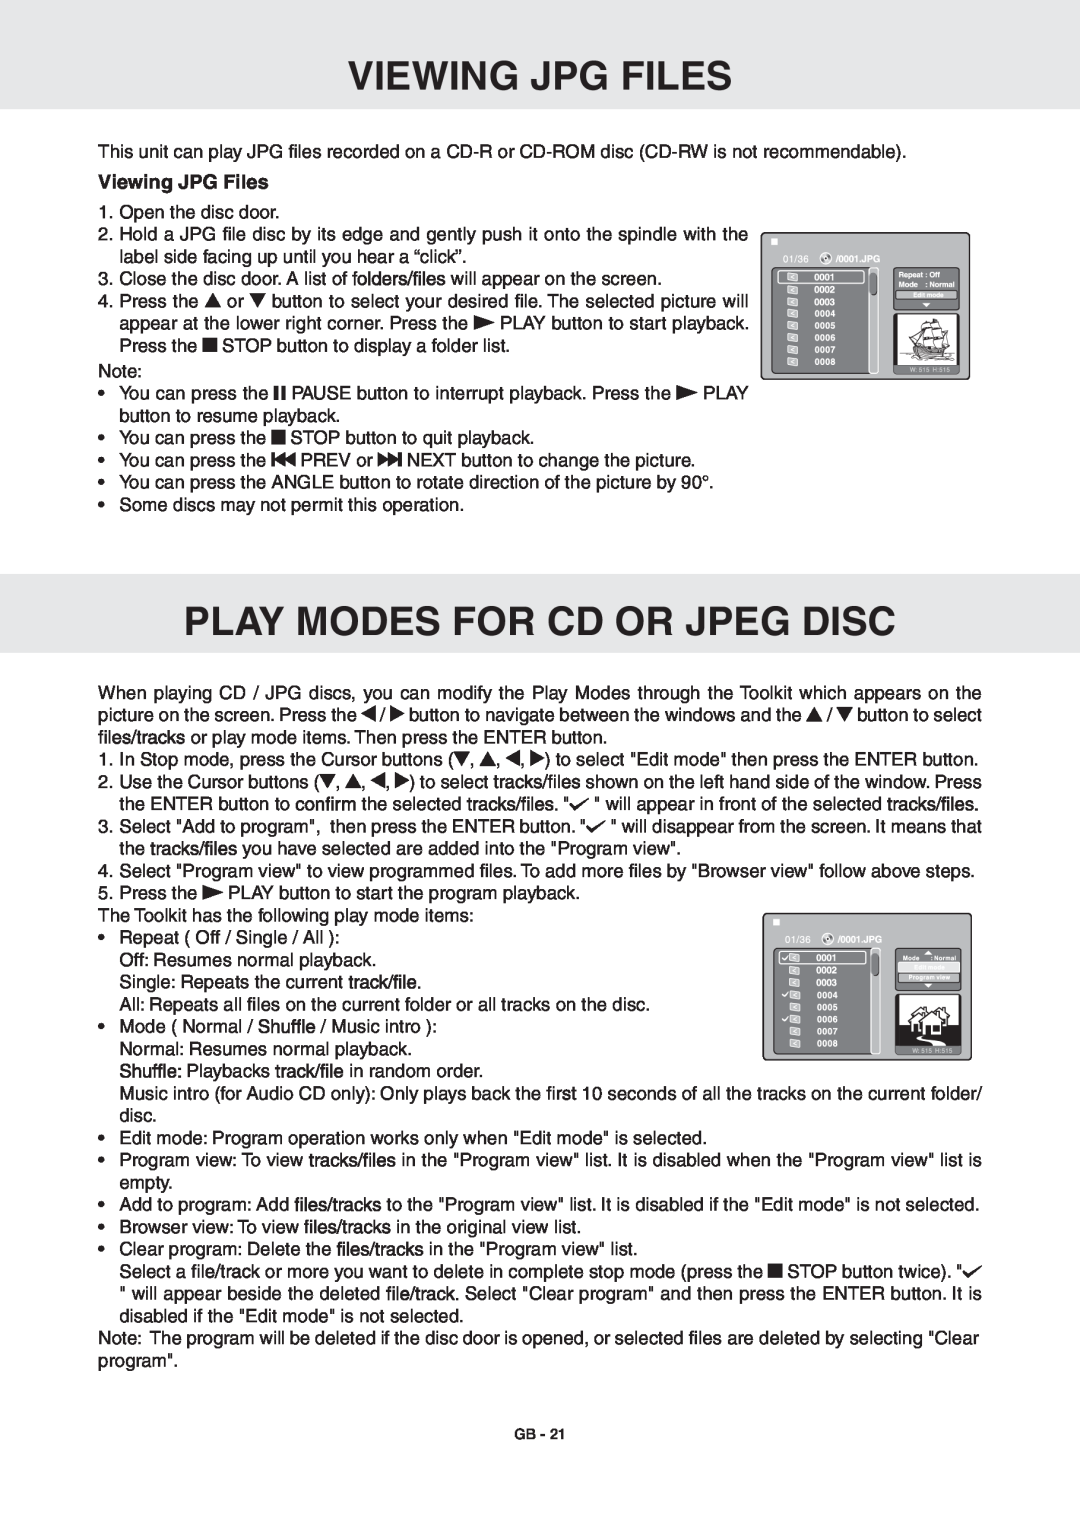 RCA DRC6389T owner manual Viewing Jpg Files, Play Modes For Cd Or Jpeg Disc, Viewing JPG Files 